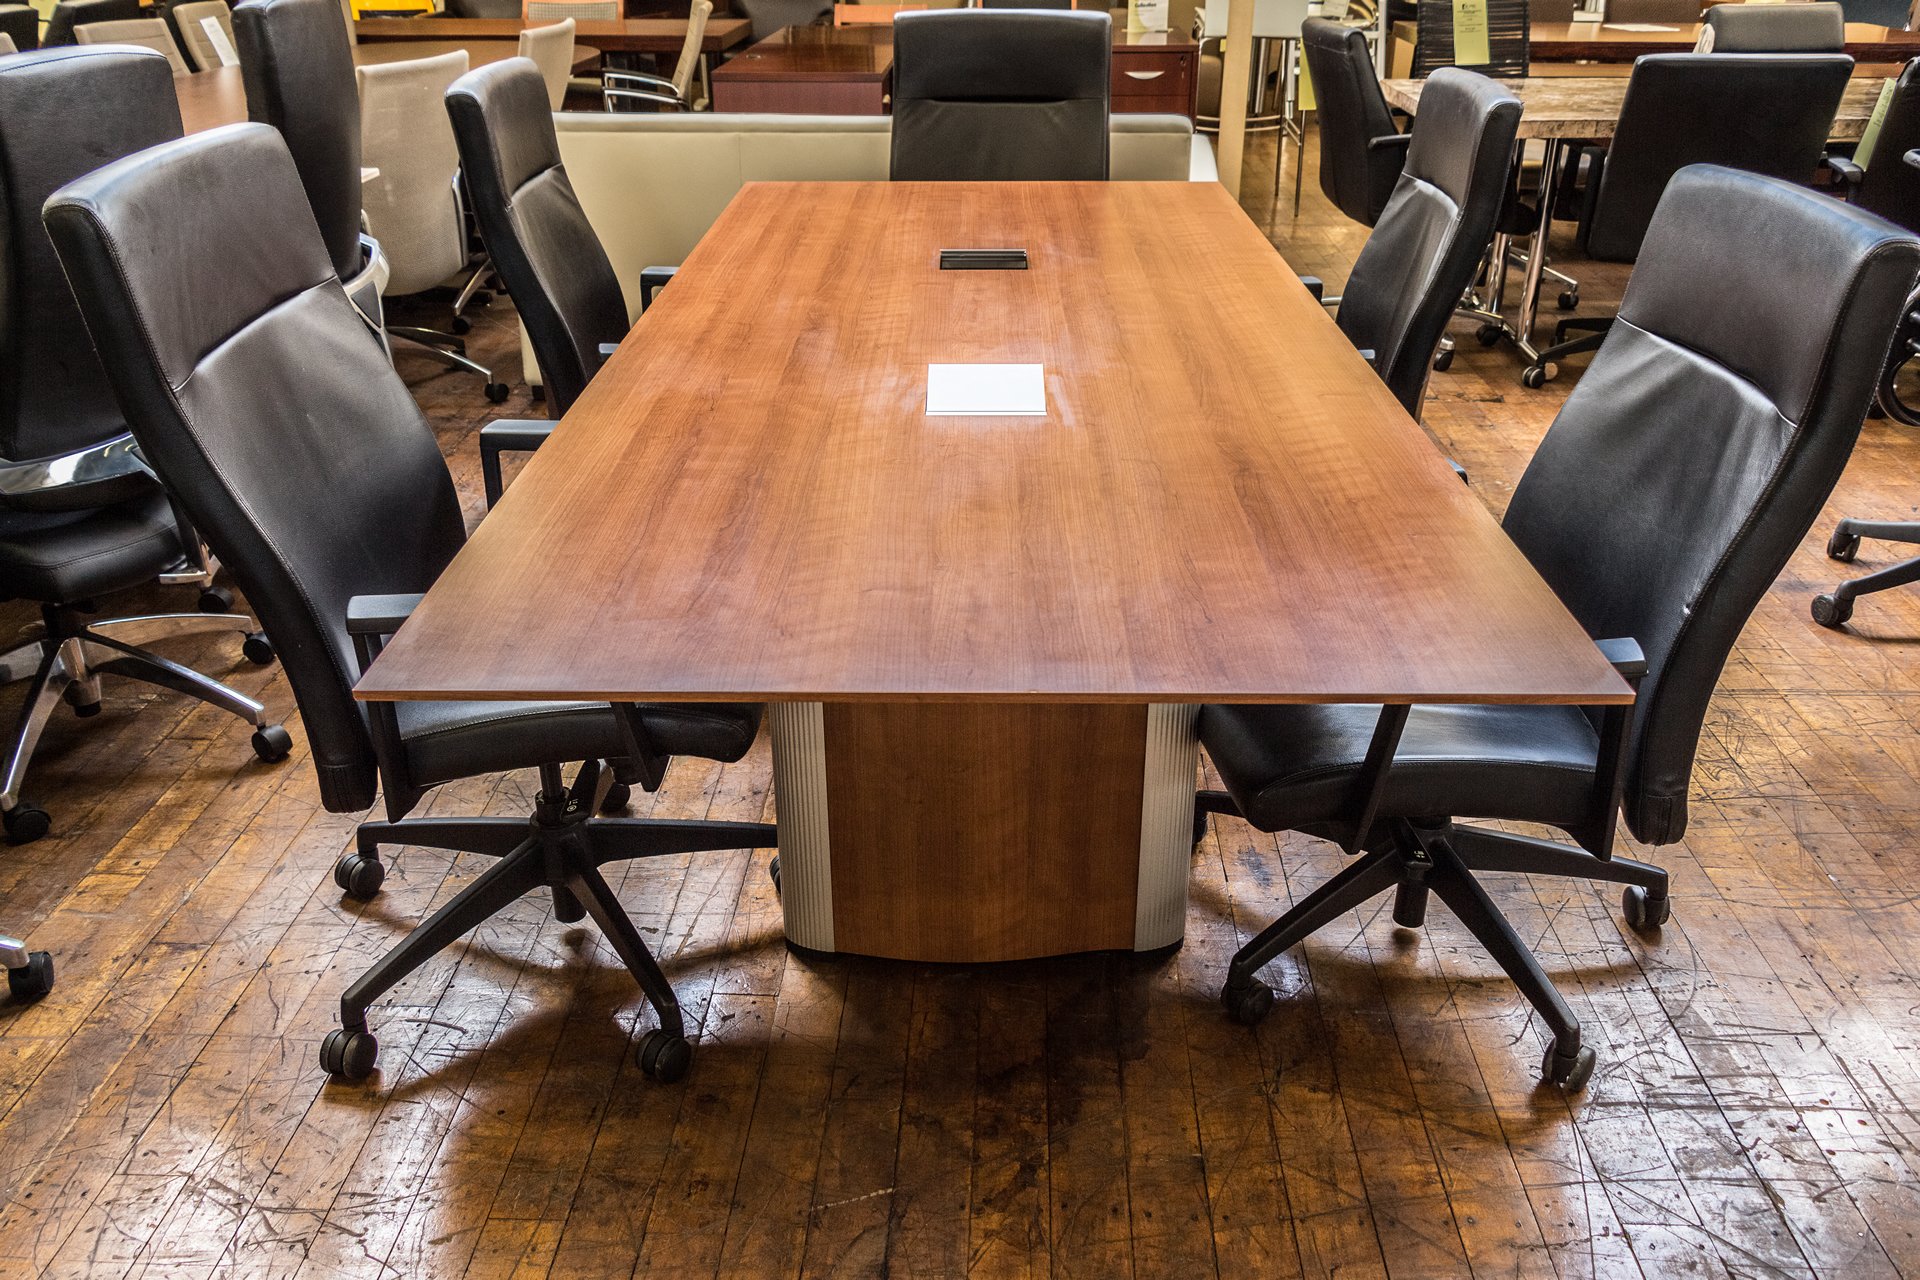 peartreeofficefurniture_peartreeofficefurniture_peartreeofficefurniture_nienkamper-vox-8-x-3-5-cherry-laminate-tapered-edge-conference-table-2.jpg